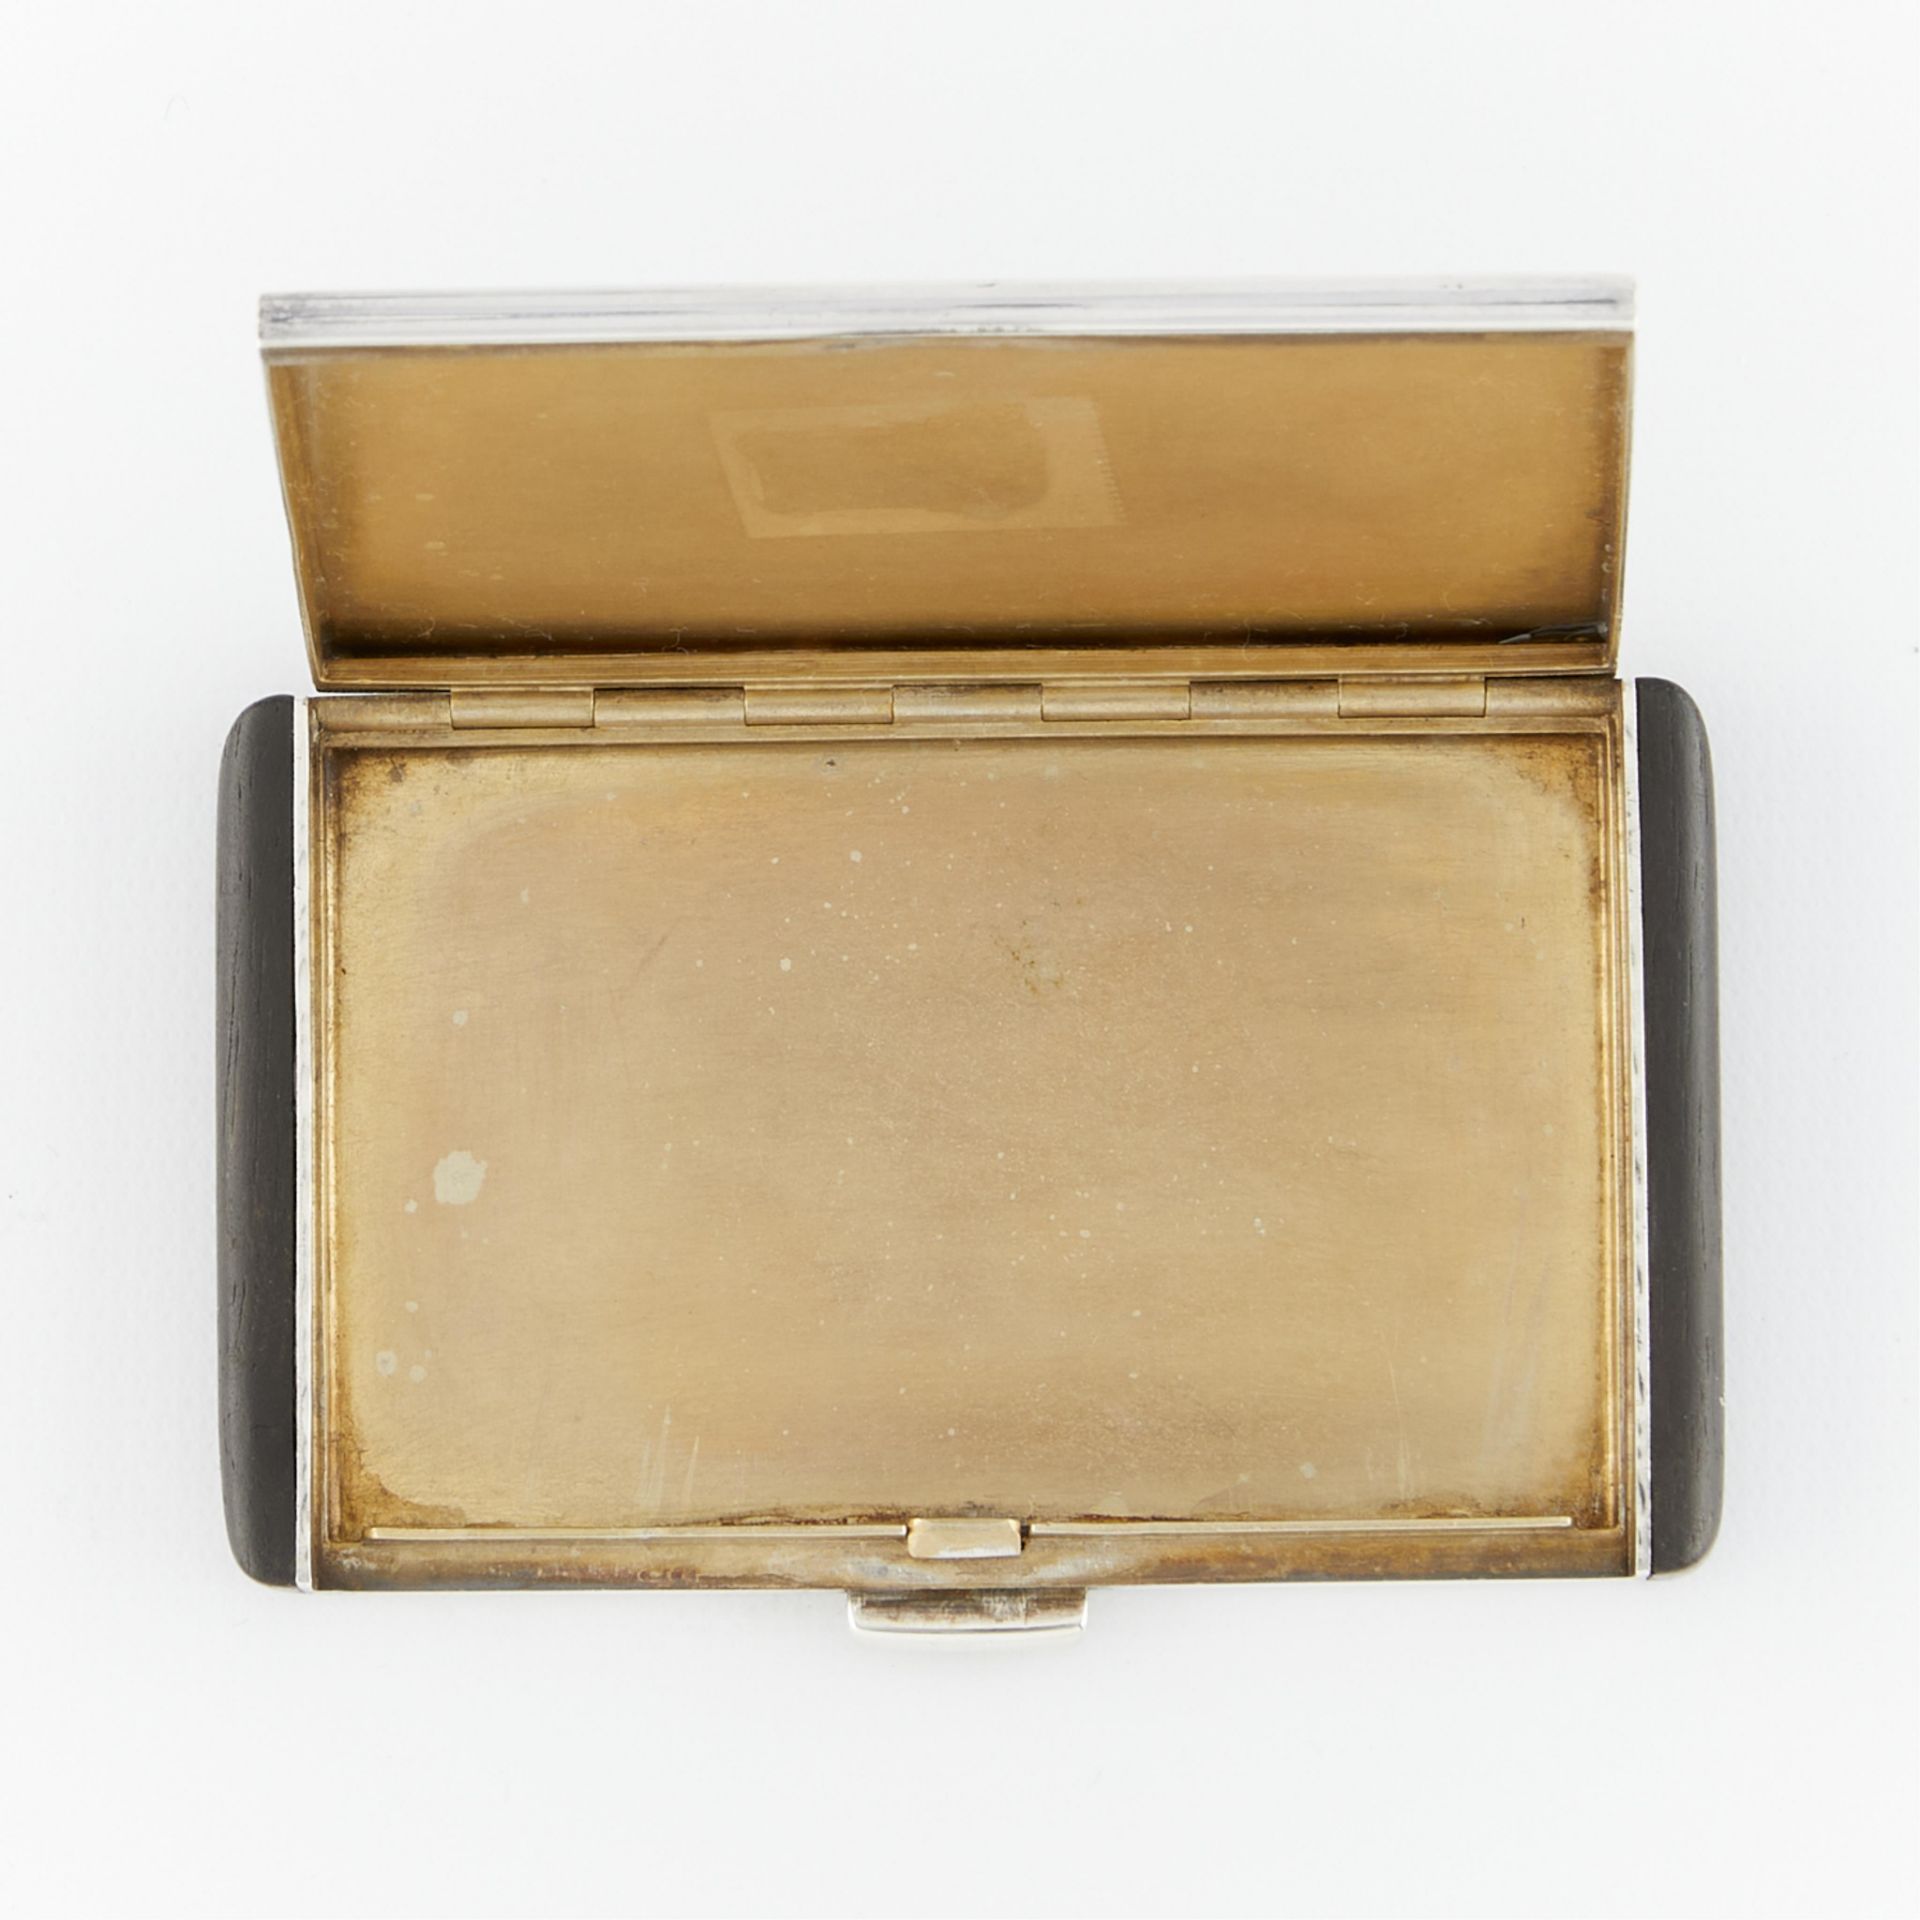 Austrian .935 Silver & Wood Case - Image 2 of 5